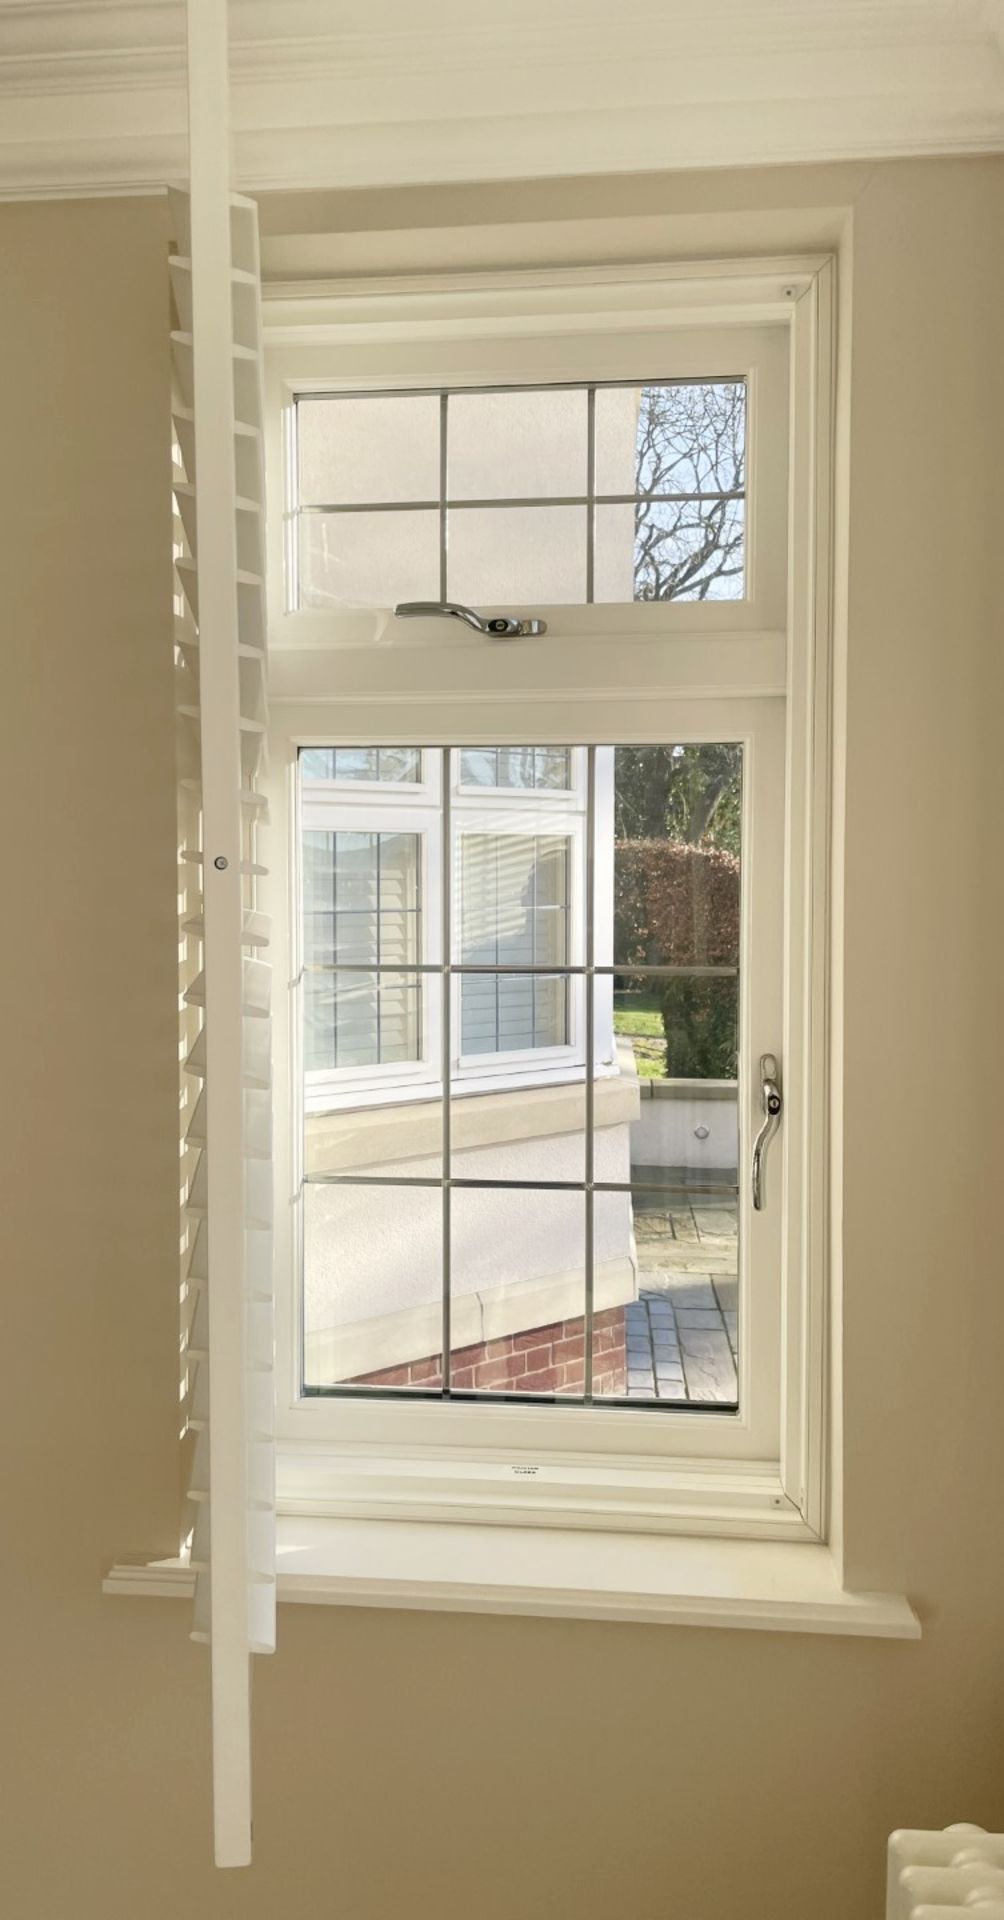 1 x Hardwood Timber Double Glazed Window Frames fitted with Shutter Blinds, In White - Ref: PAN106 - Image 4 of 23